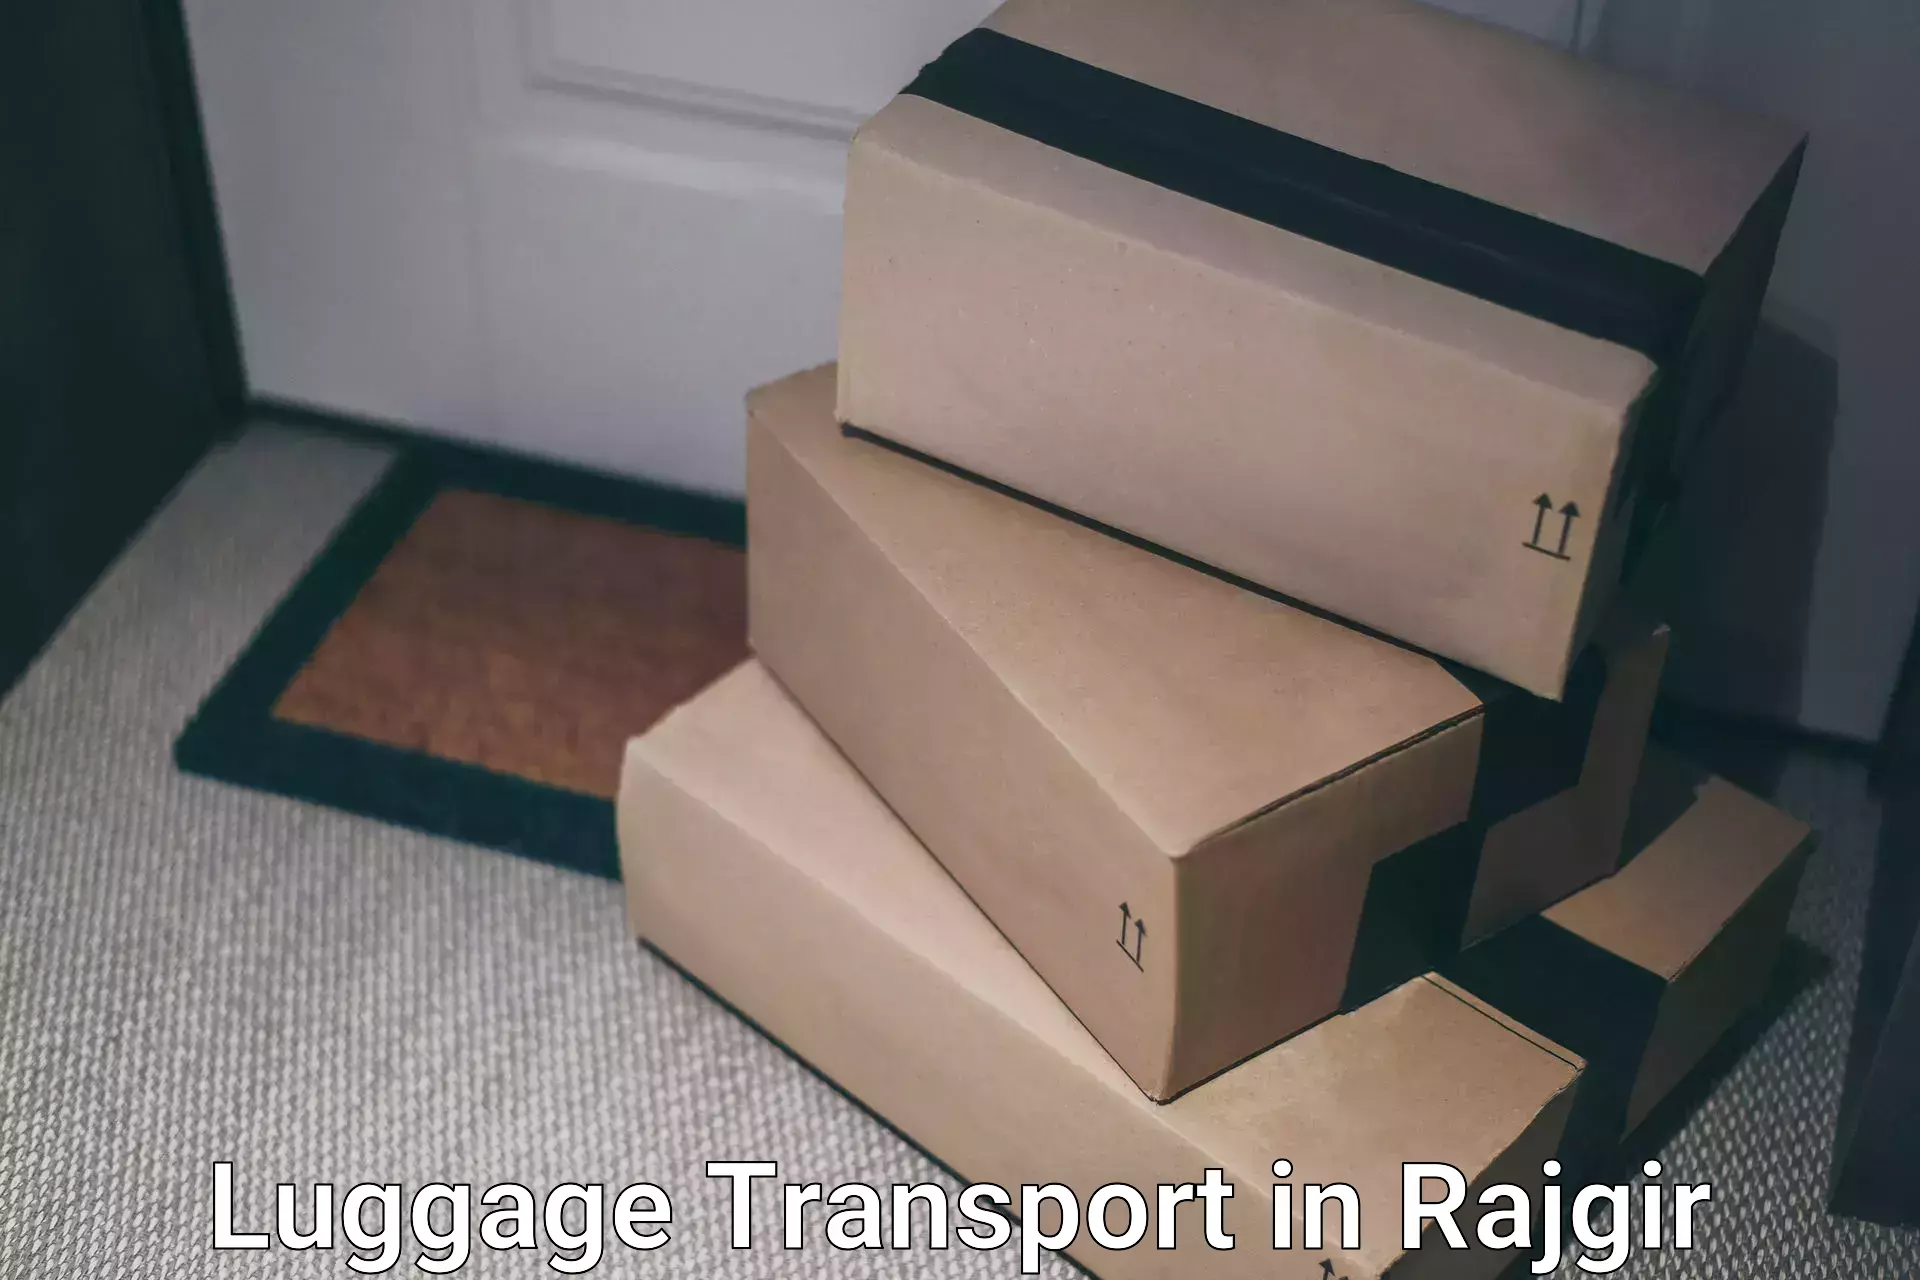 Automated luggage transport in Rajgir